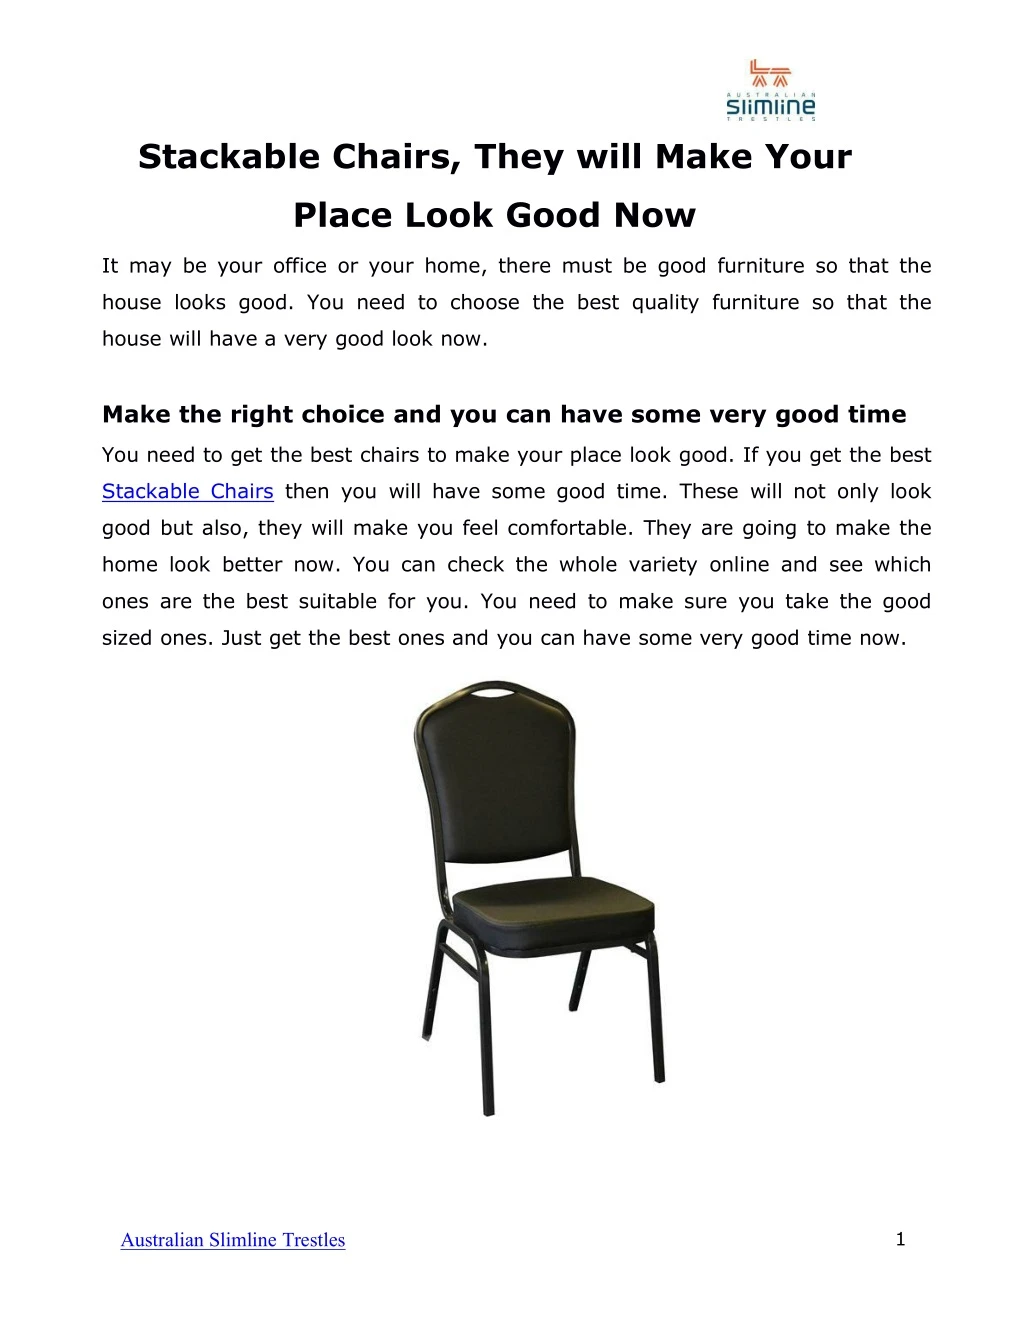 stackable chairs they will make your